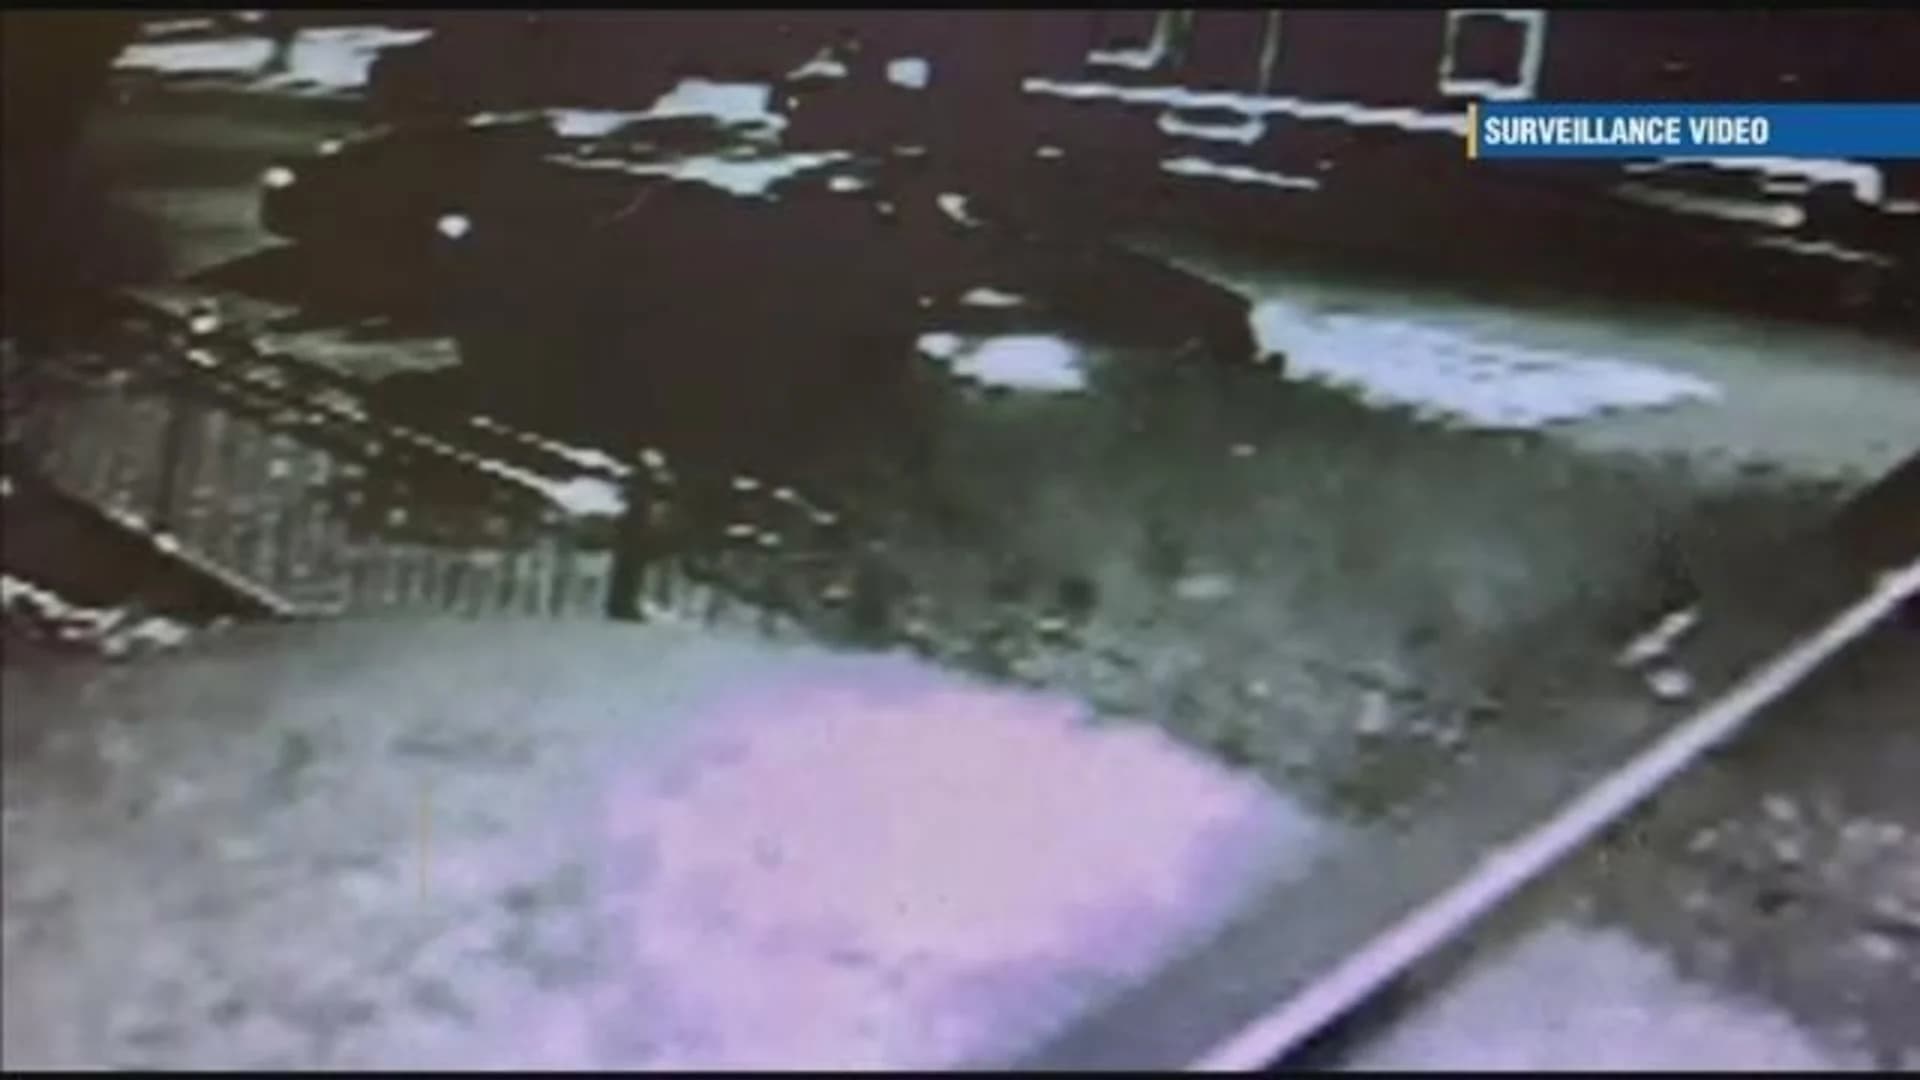 Surveillance video shows scuffle that led to woman’s shooting